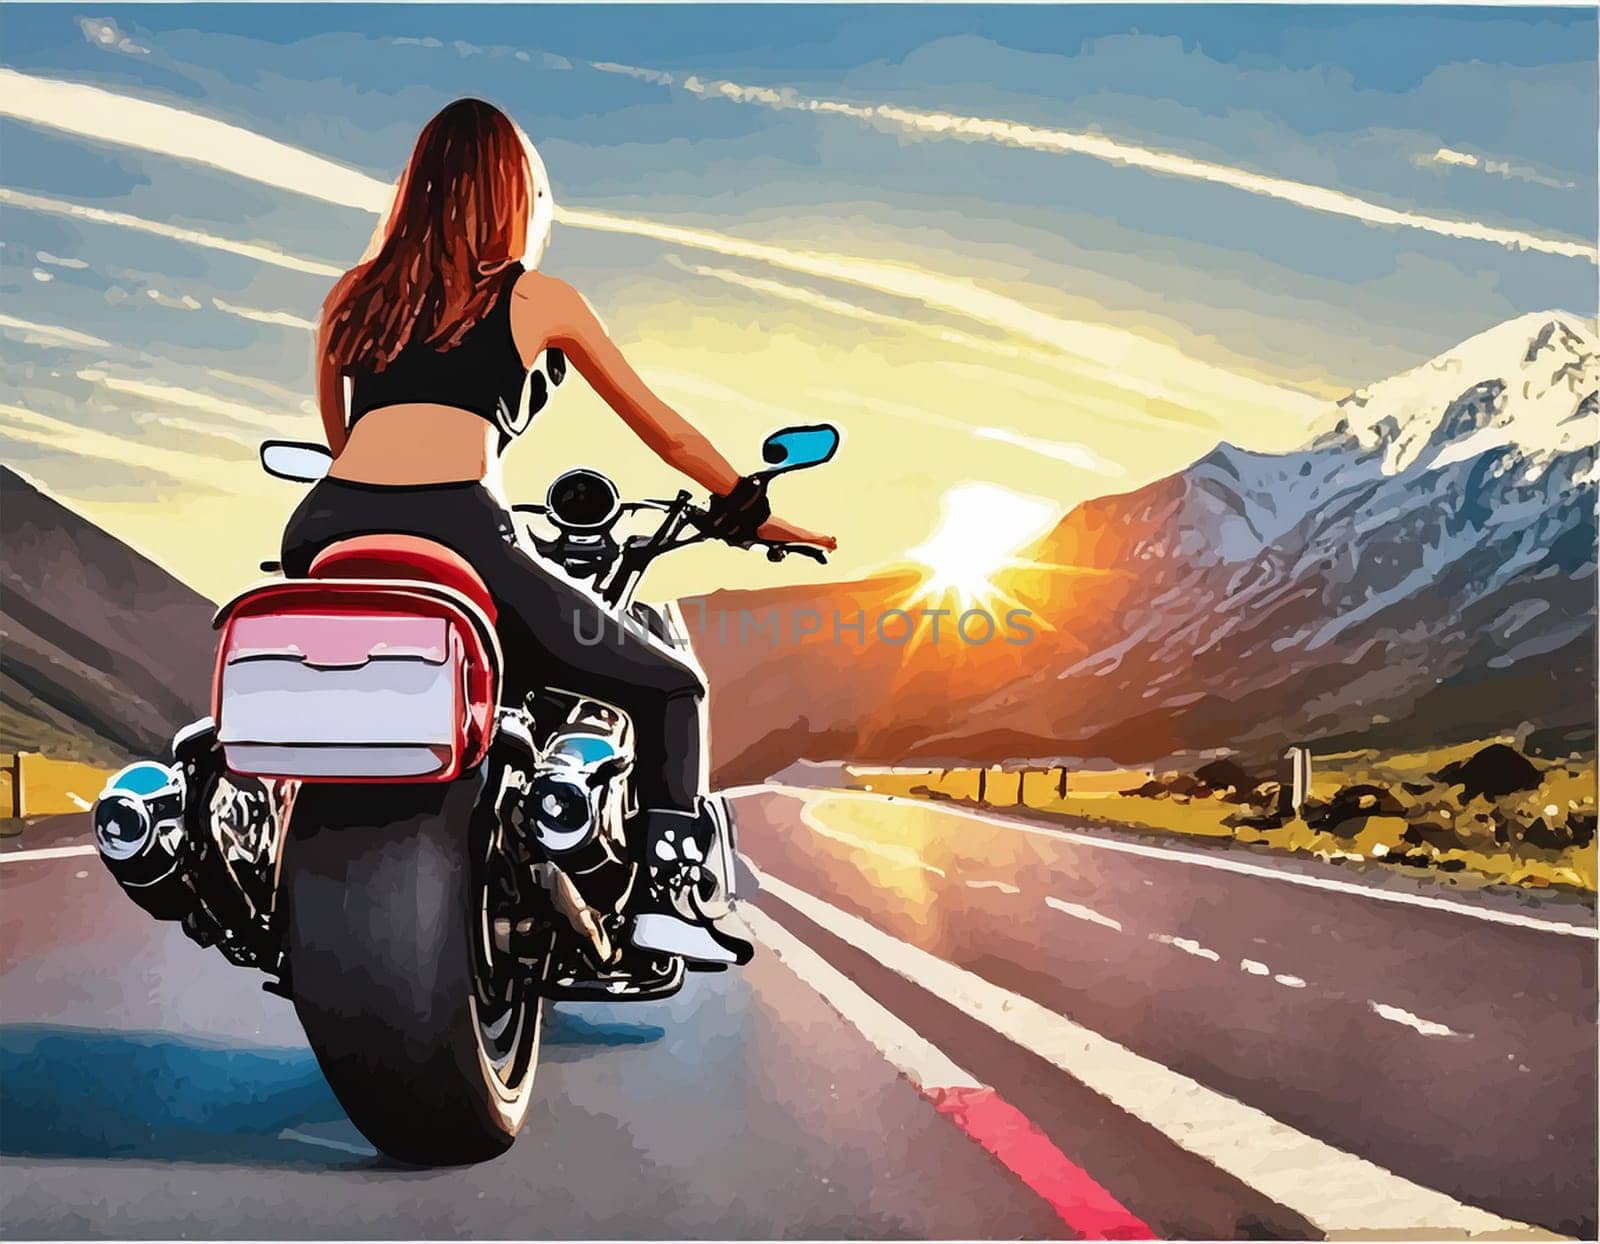 Riding a motorcycle on the street. Have fun driving along empty roads on a motorcycle tour. Copyspace for your individual text.